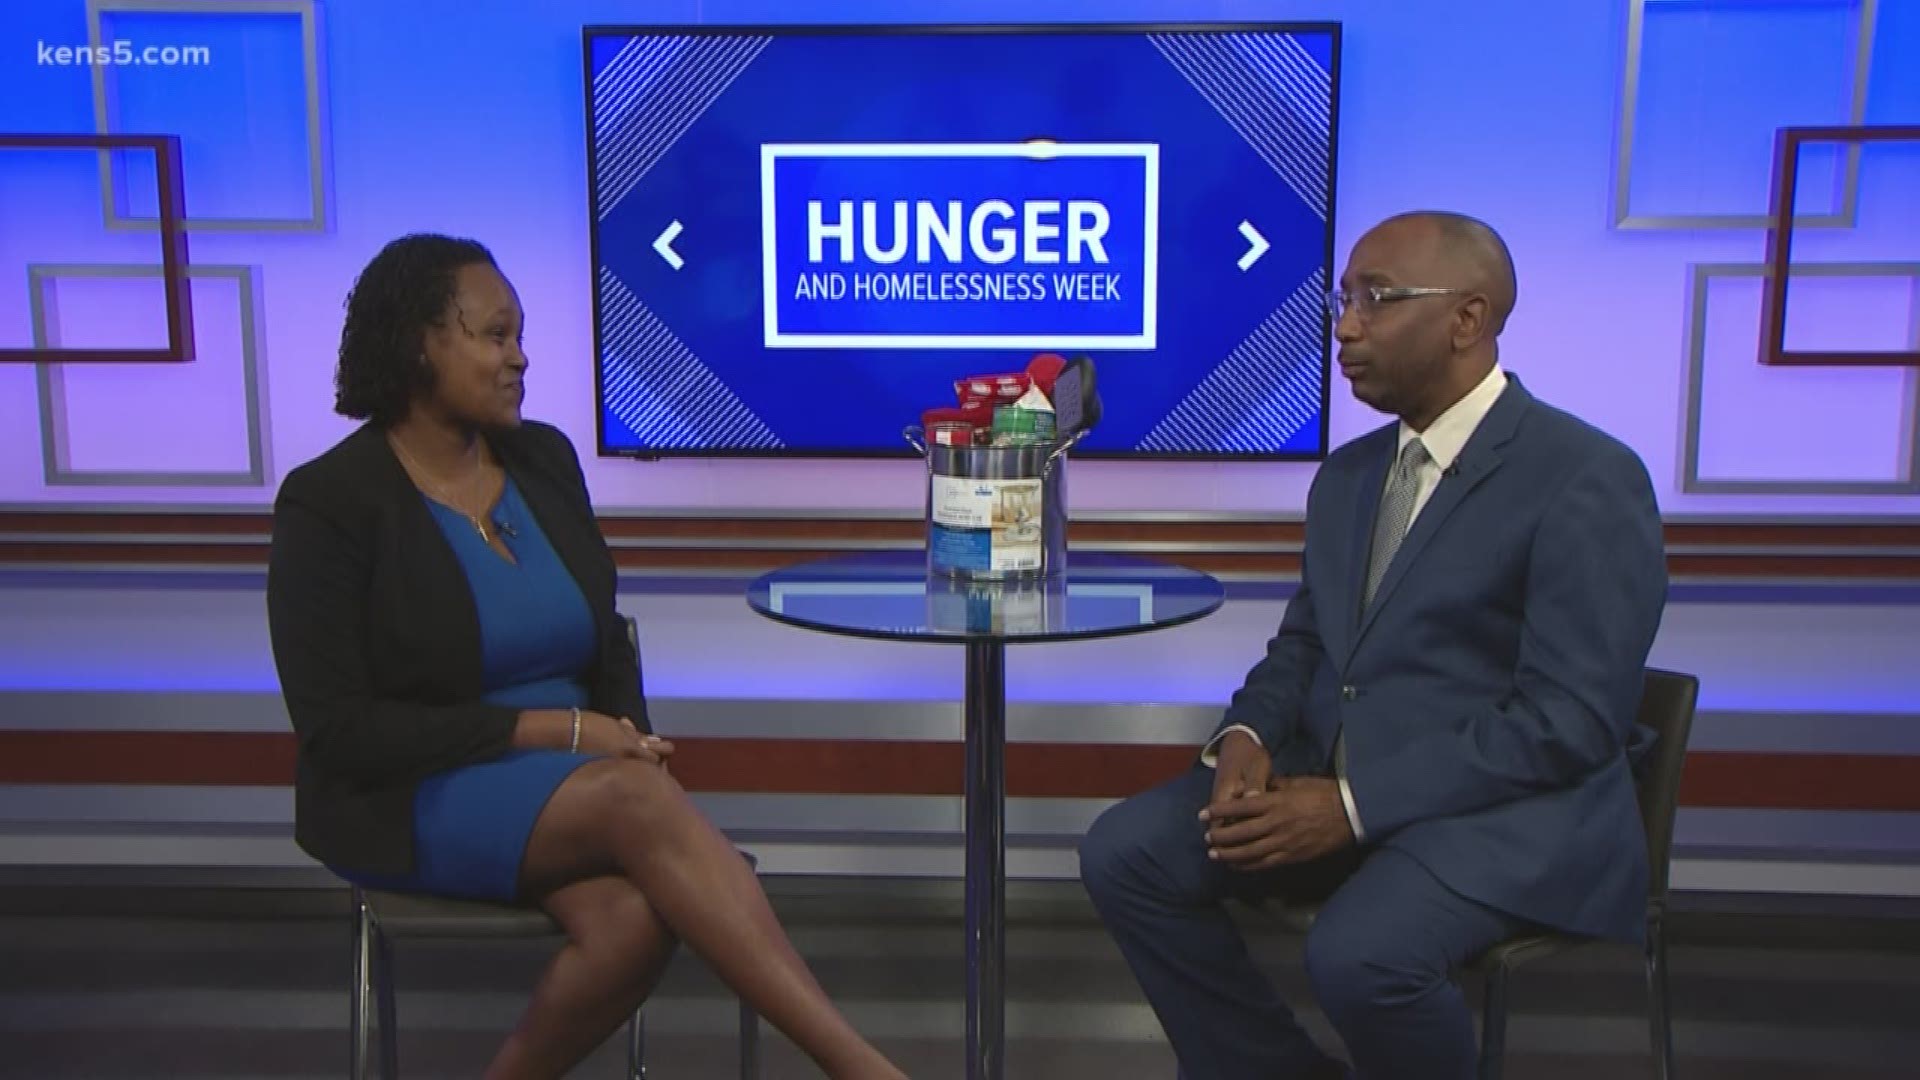 We spoke with SAMMinistries about Homelessness and Hunger Awareness Week.